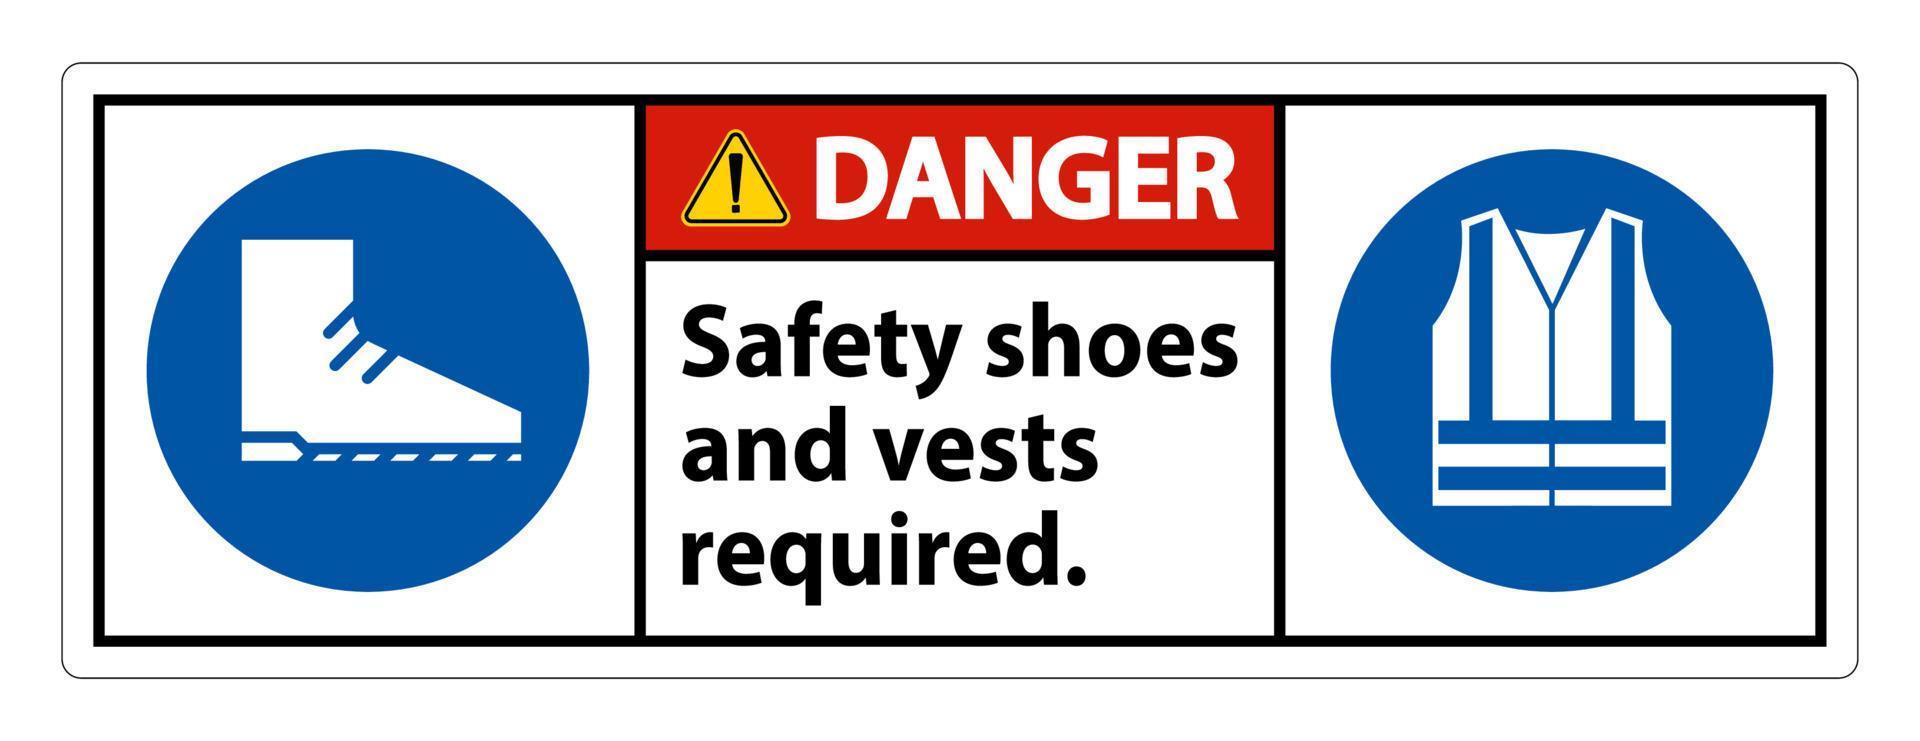 Danger Sign Safety Shoes And Vest Required With PPE Symbols on White Background,Vector Illustration vector